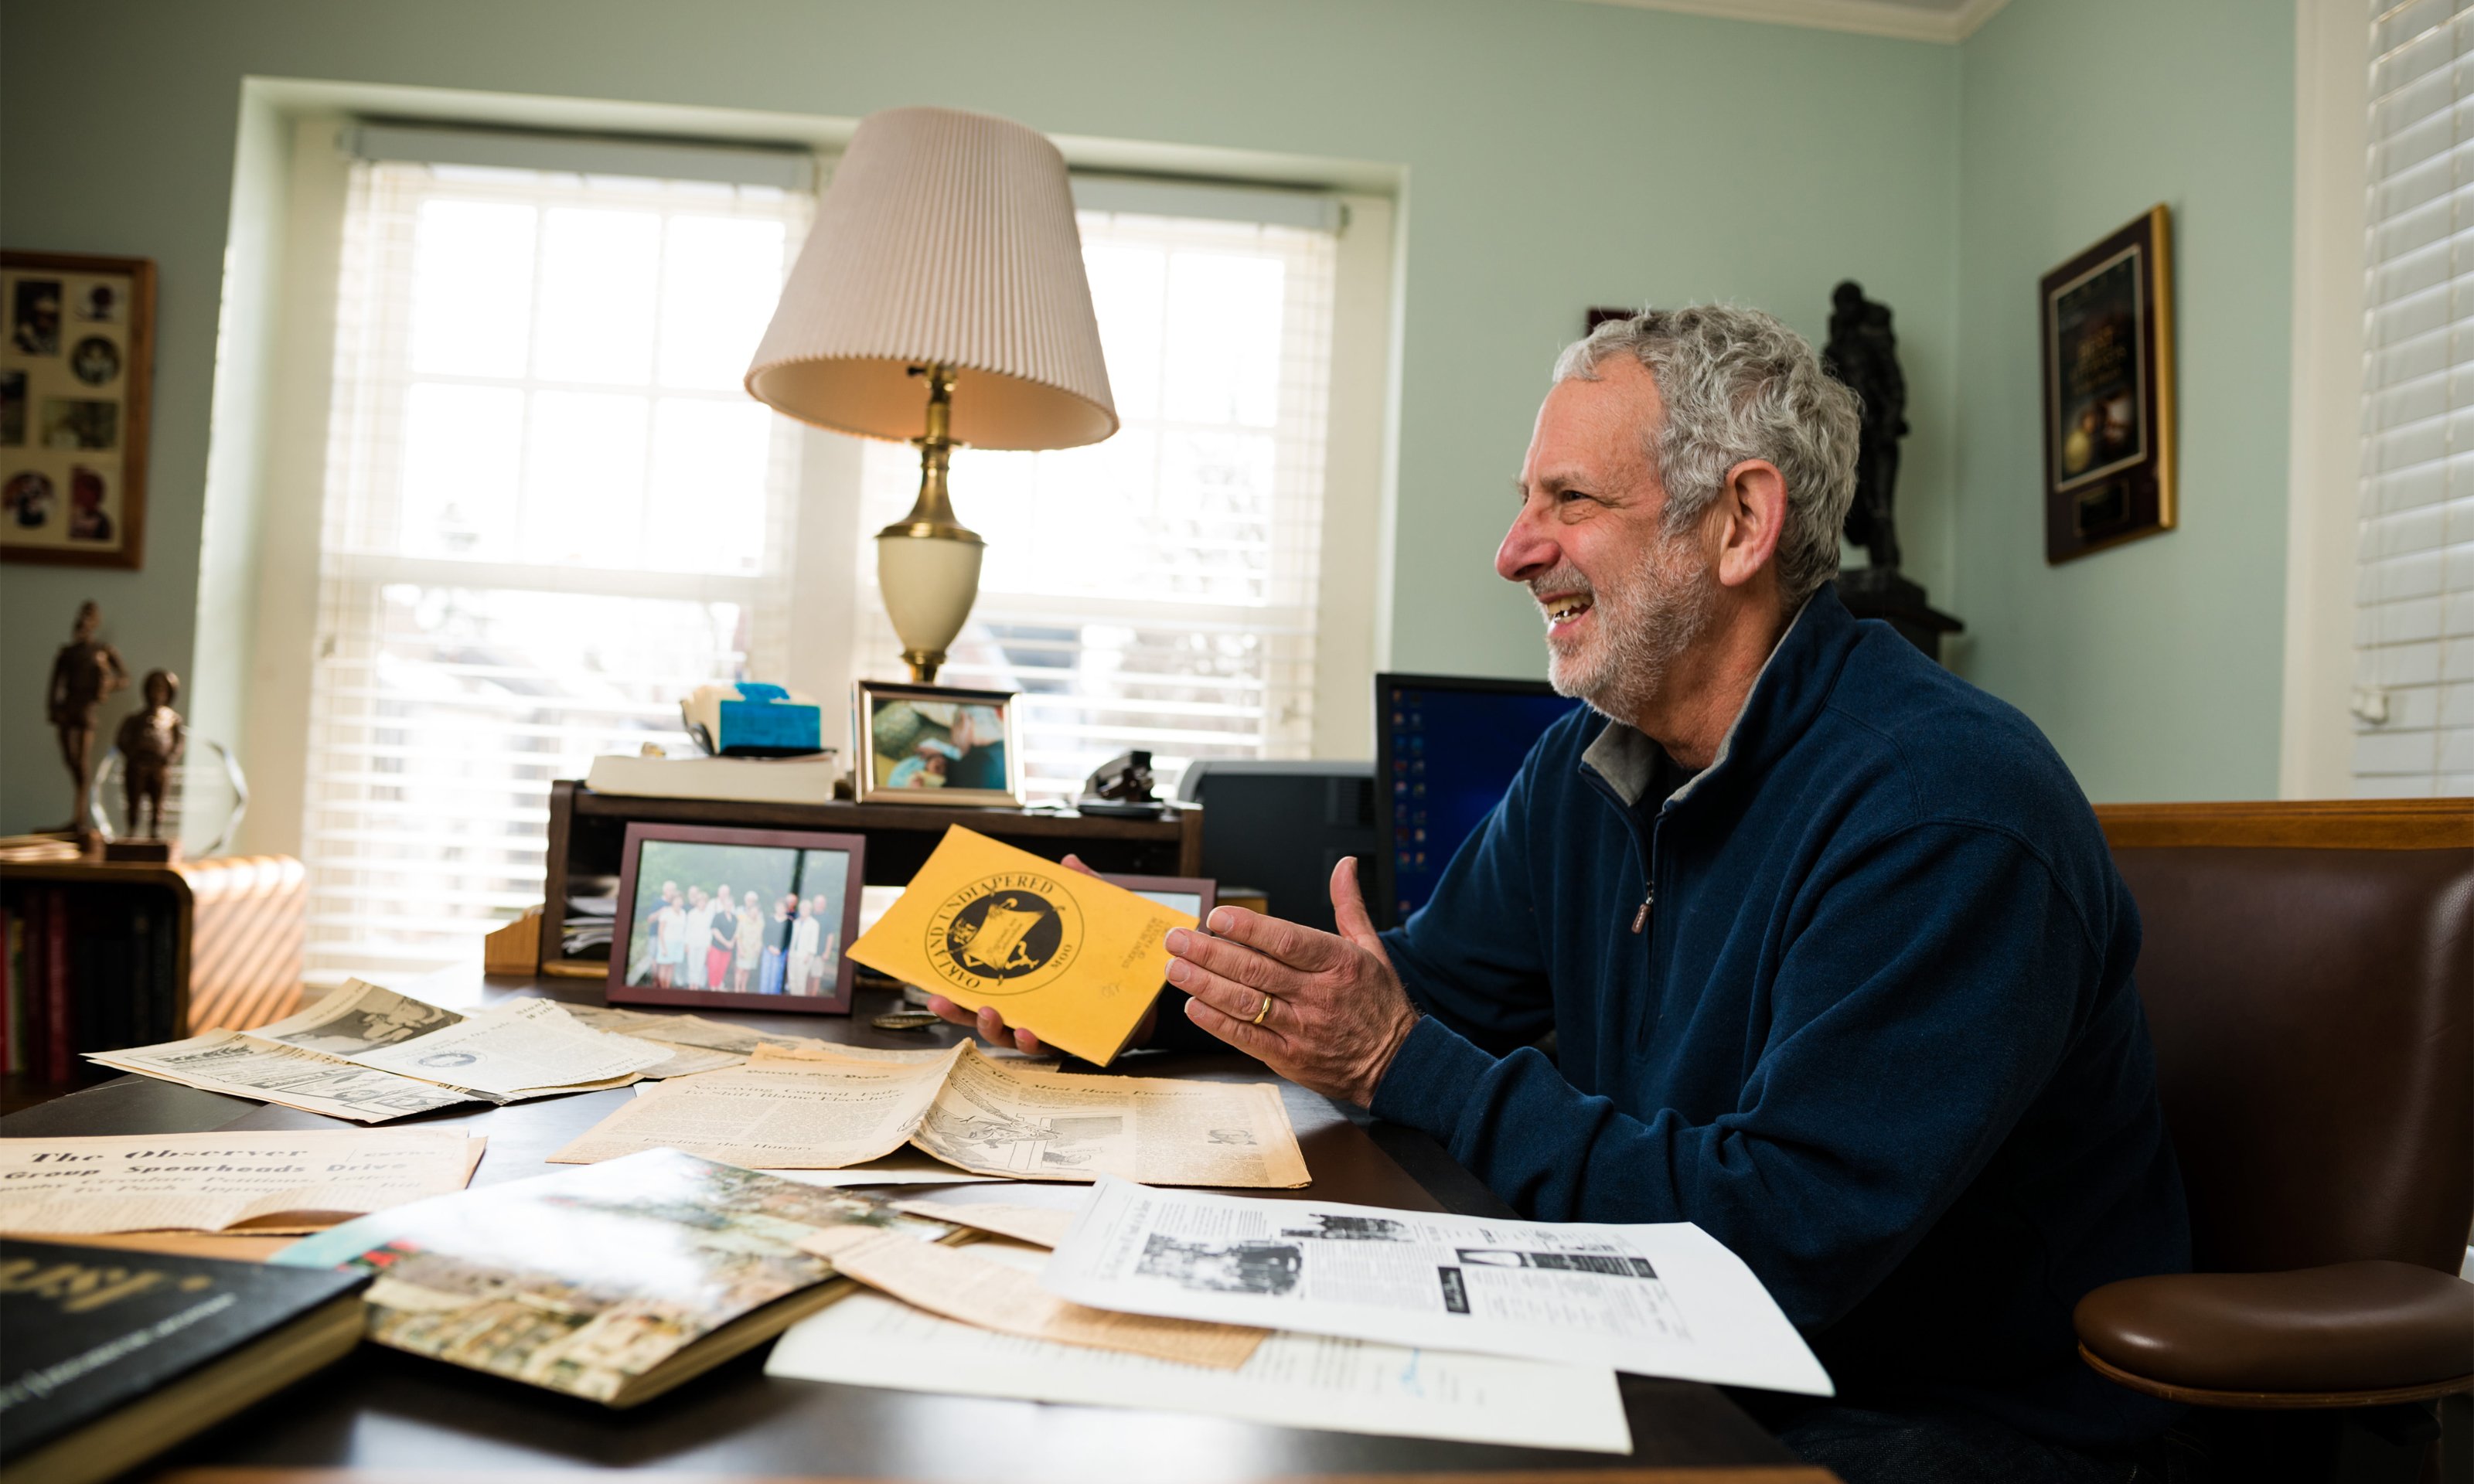 Oakland University alumnus Marty Reisig looks over papers from his days as a student 